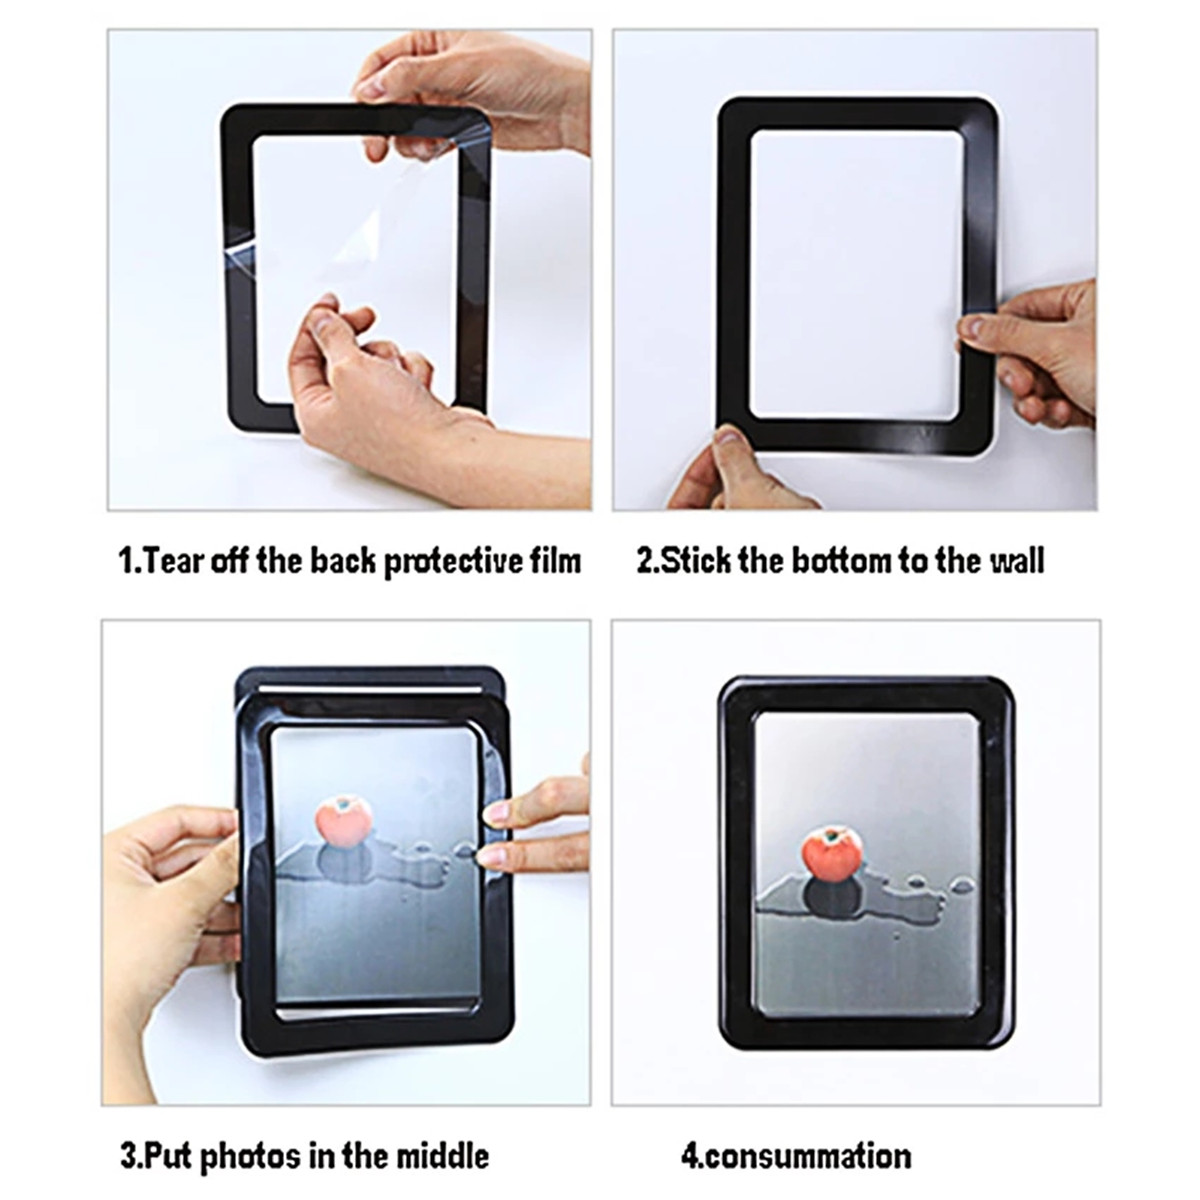 DIY Colorful Magnetic Photo Picture Frames Fridge Refrigerator Magnet Photo Frame For Wall Living Room Decoration